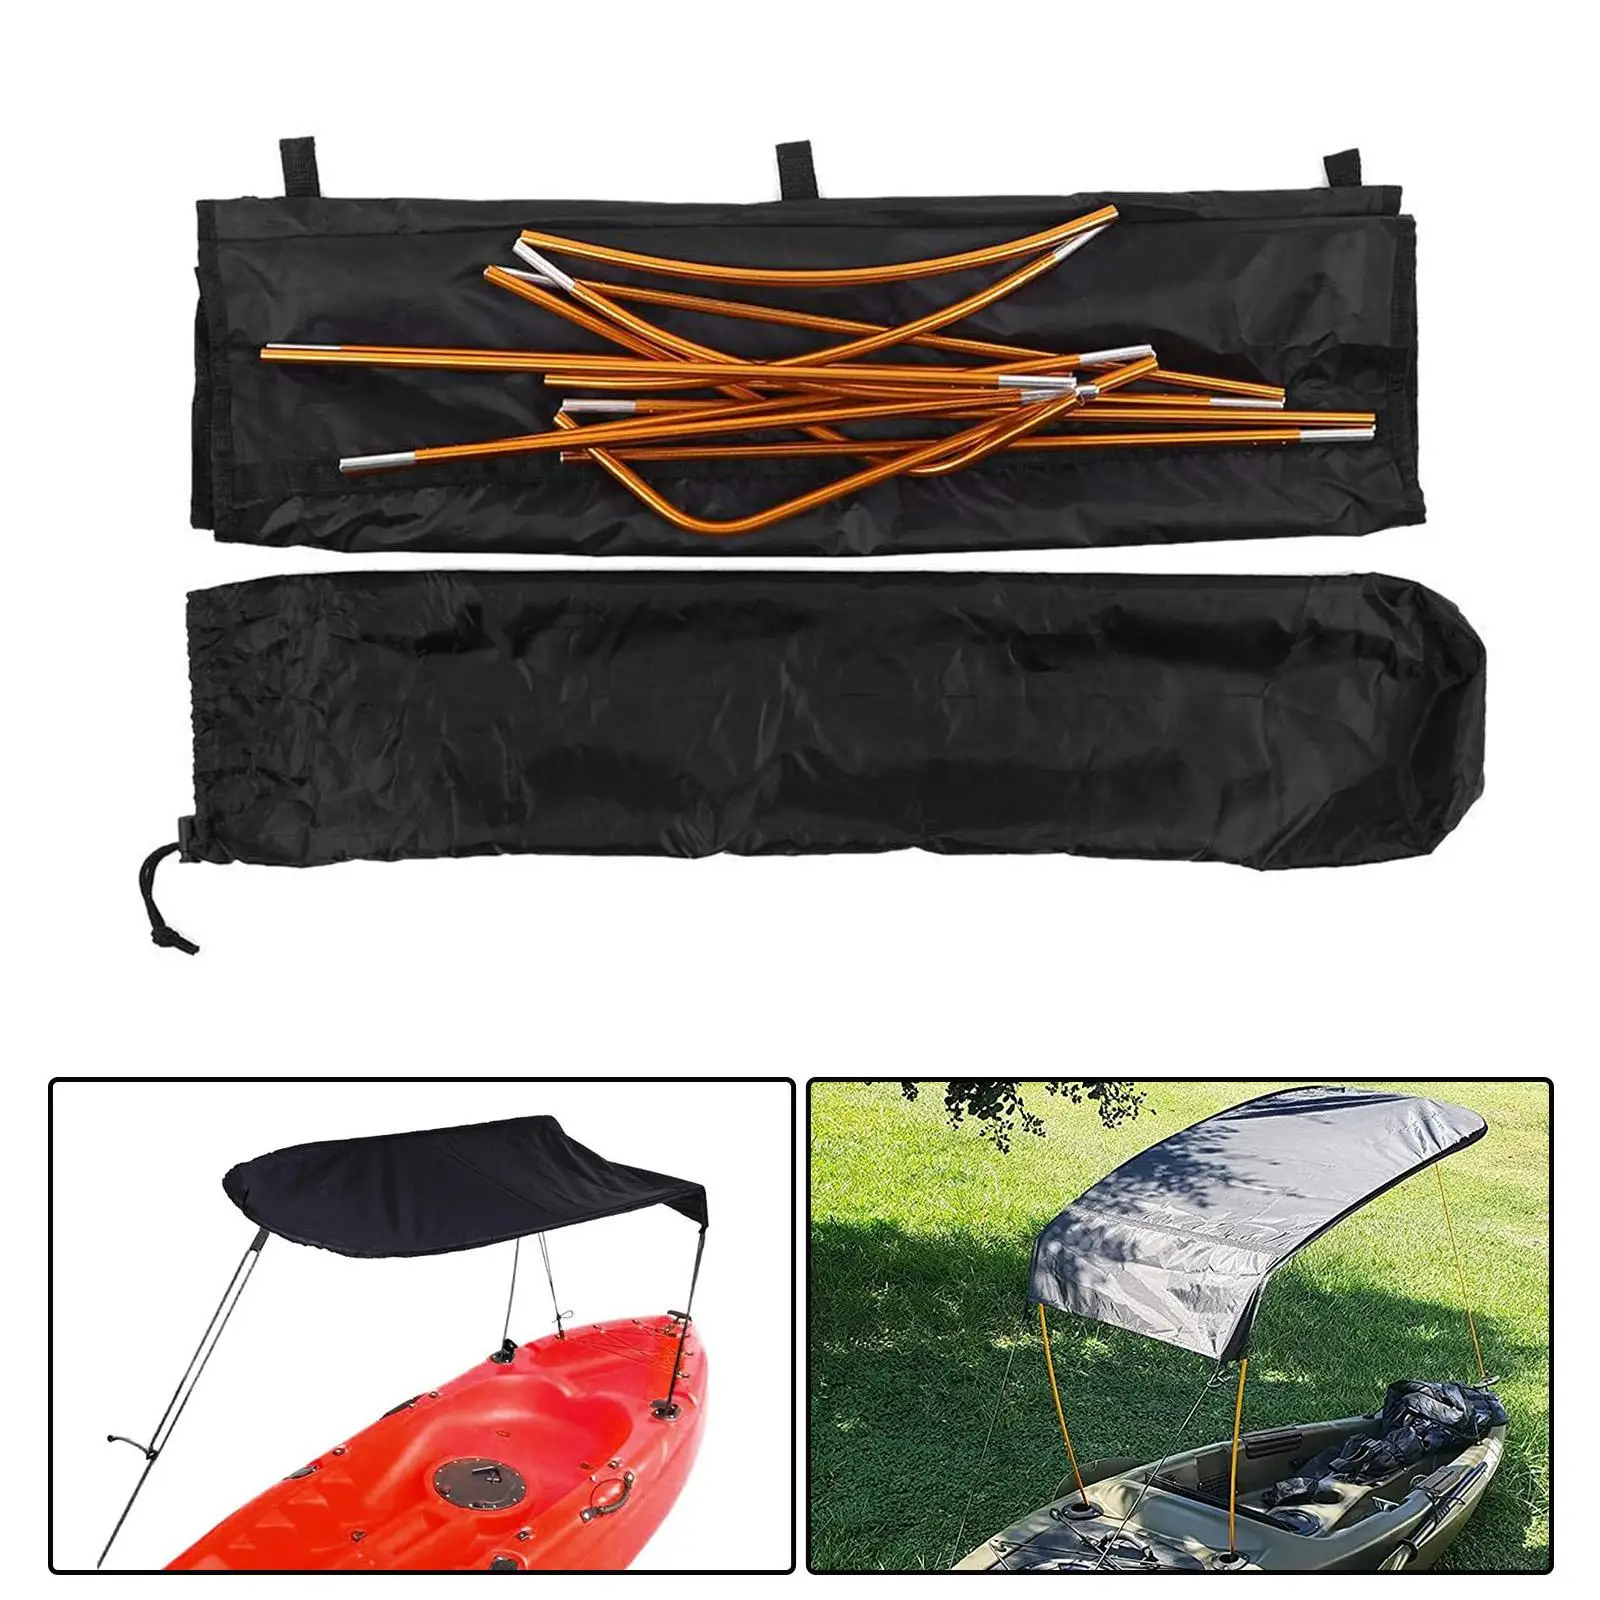 Rainproof Boat  Inflatable Boats Sailboat Awning Top Cover Canopy